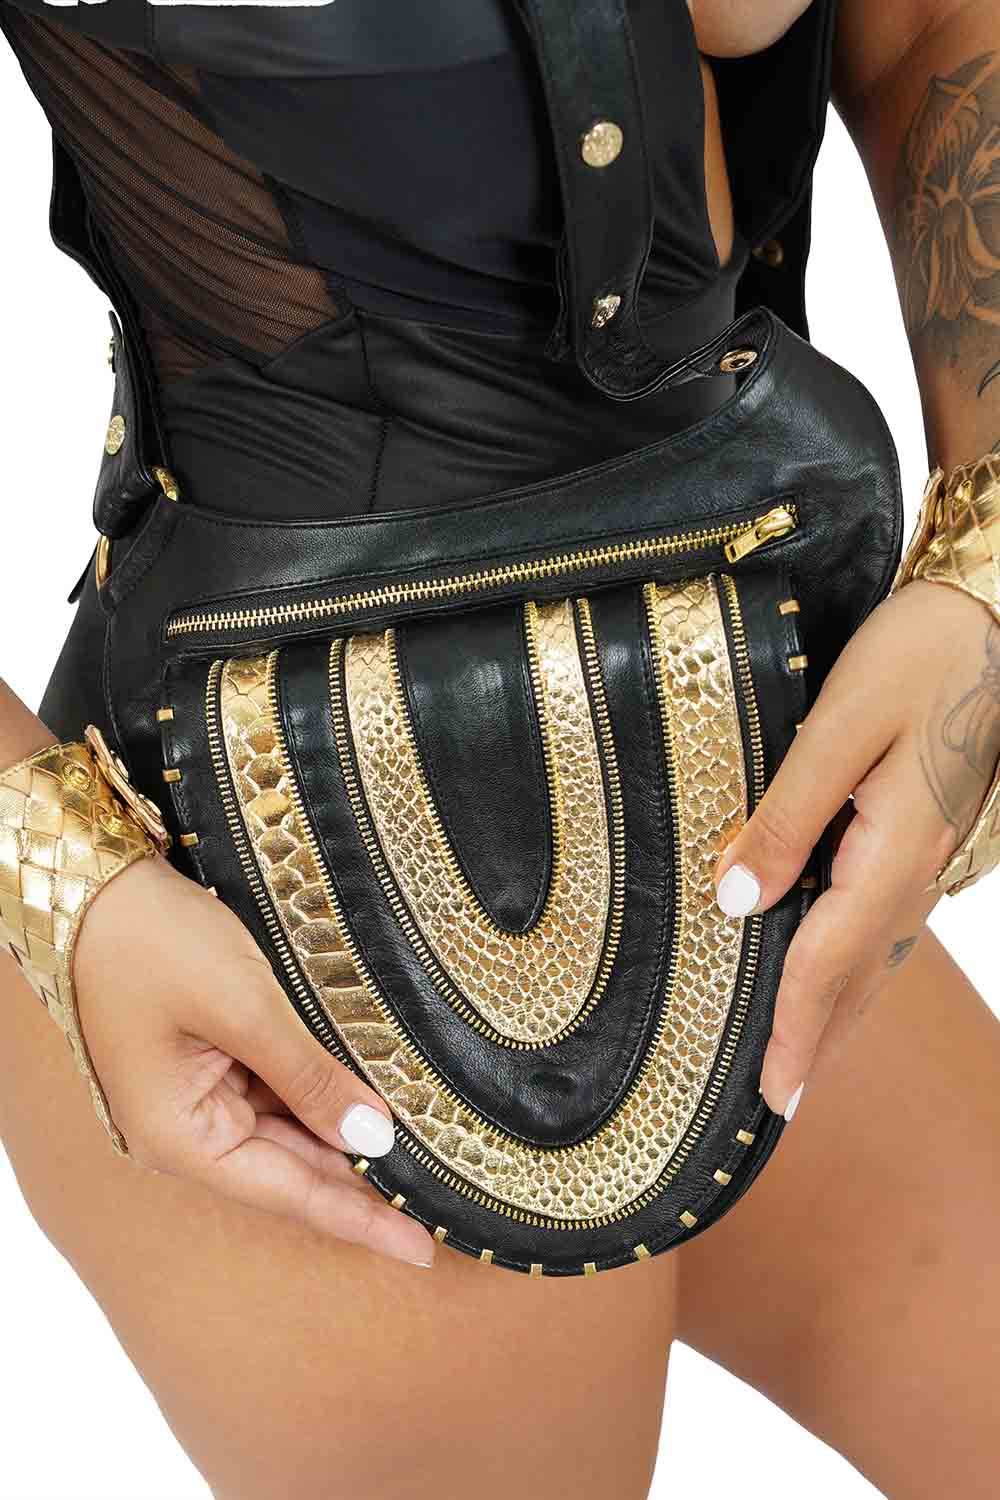 black and gold leather shoulder holster bags from Love Khaos